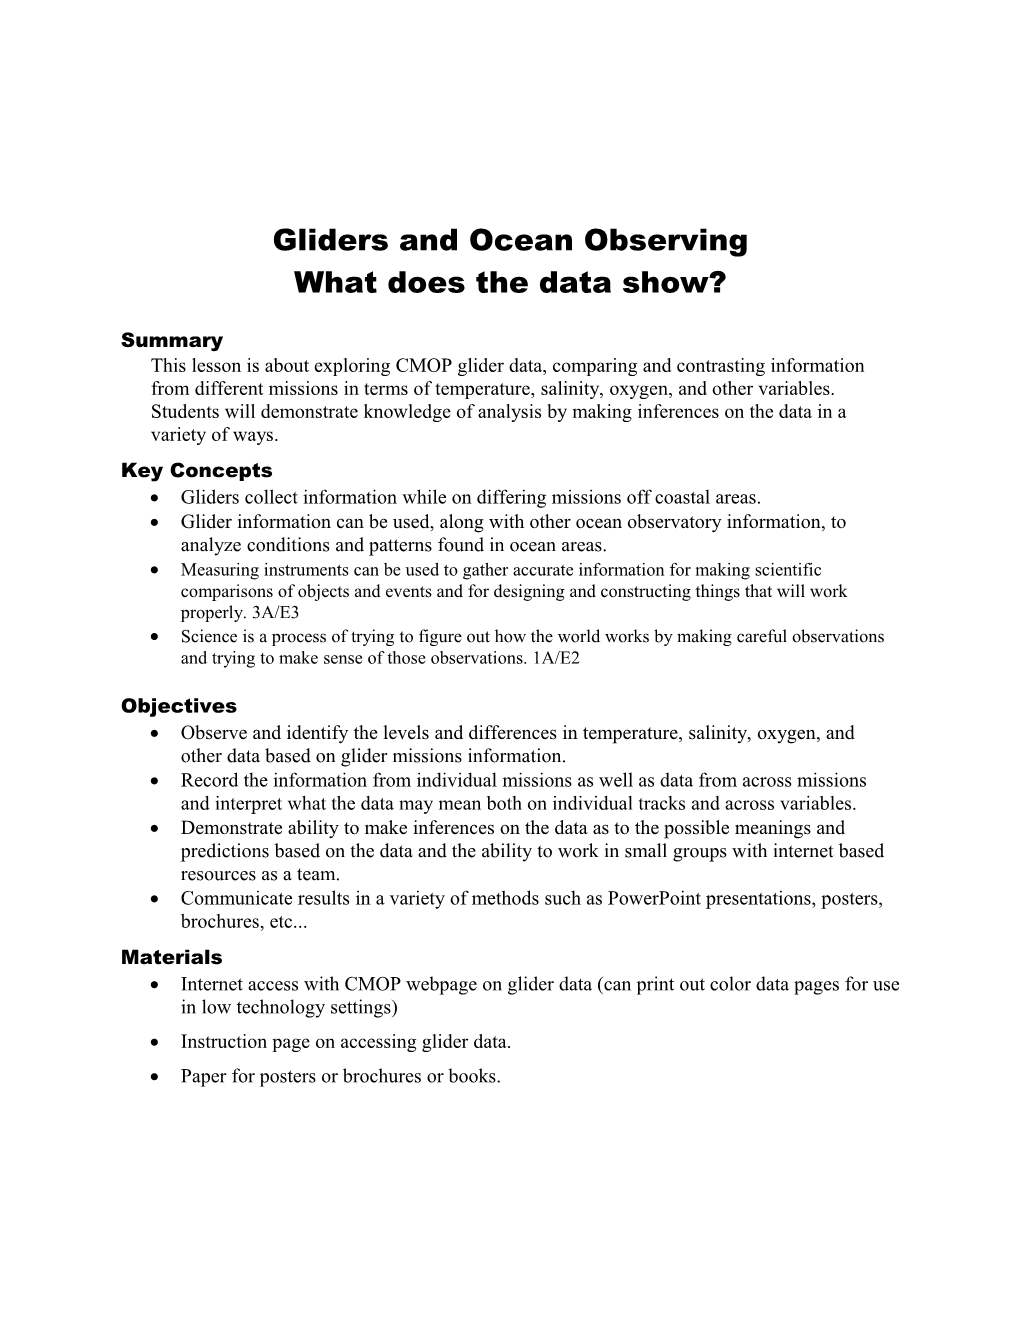 Gliders and Ocean Observing